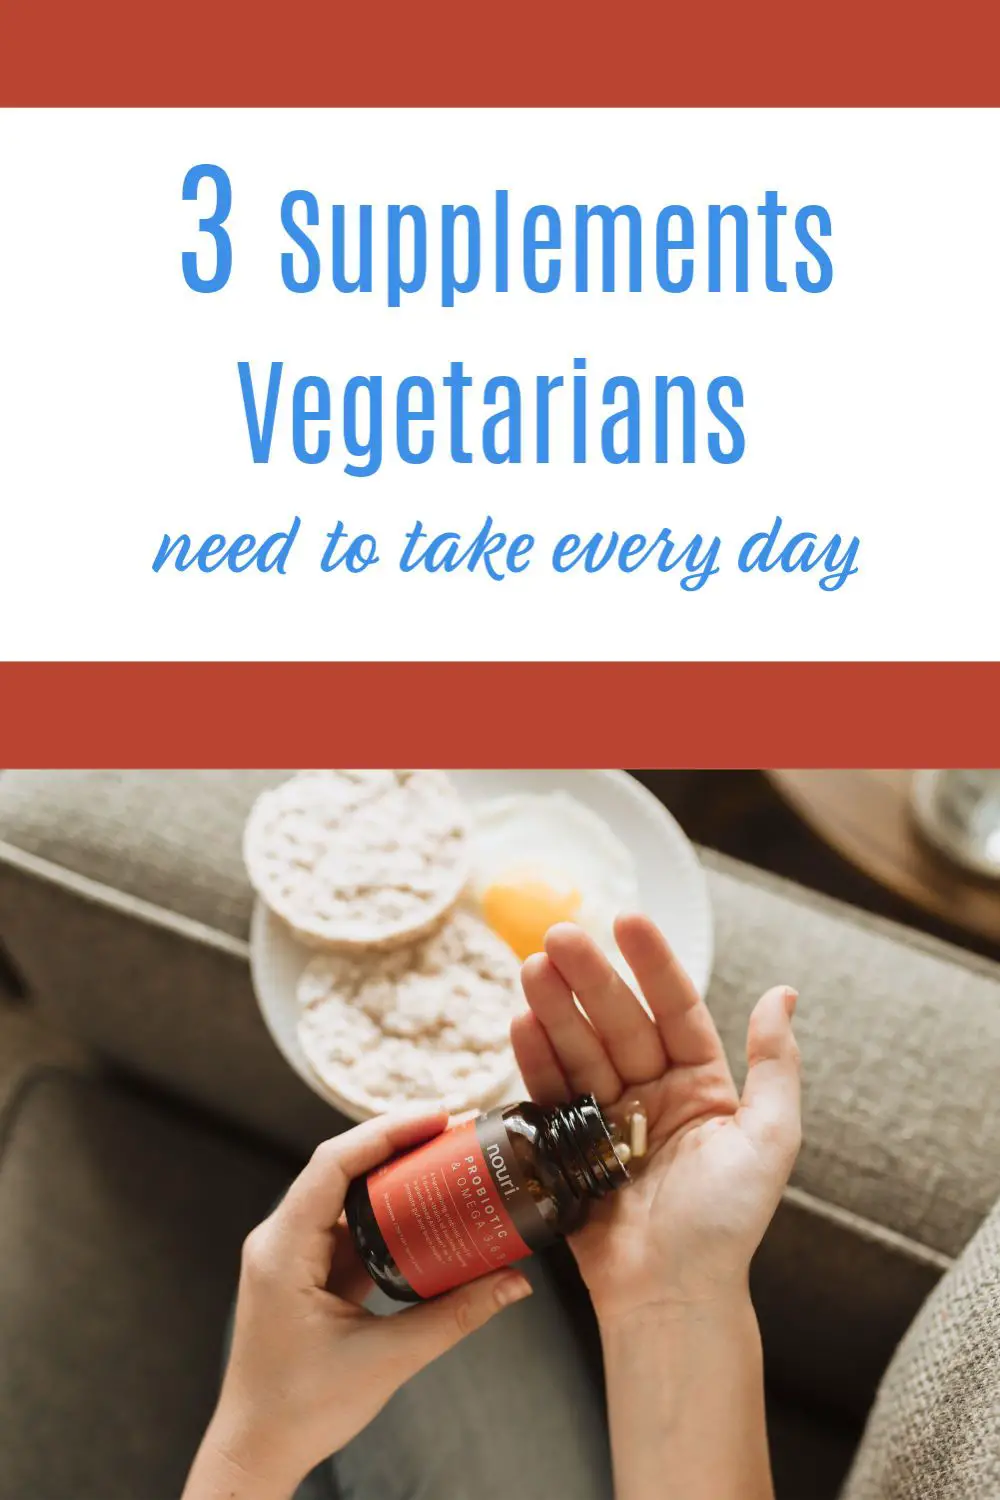 What Vitamins Should Vegetarians Take? (With images ...